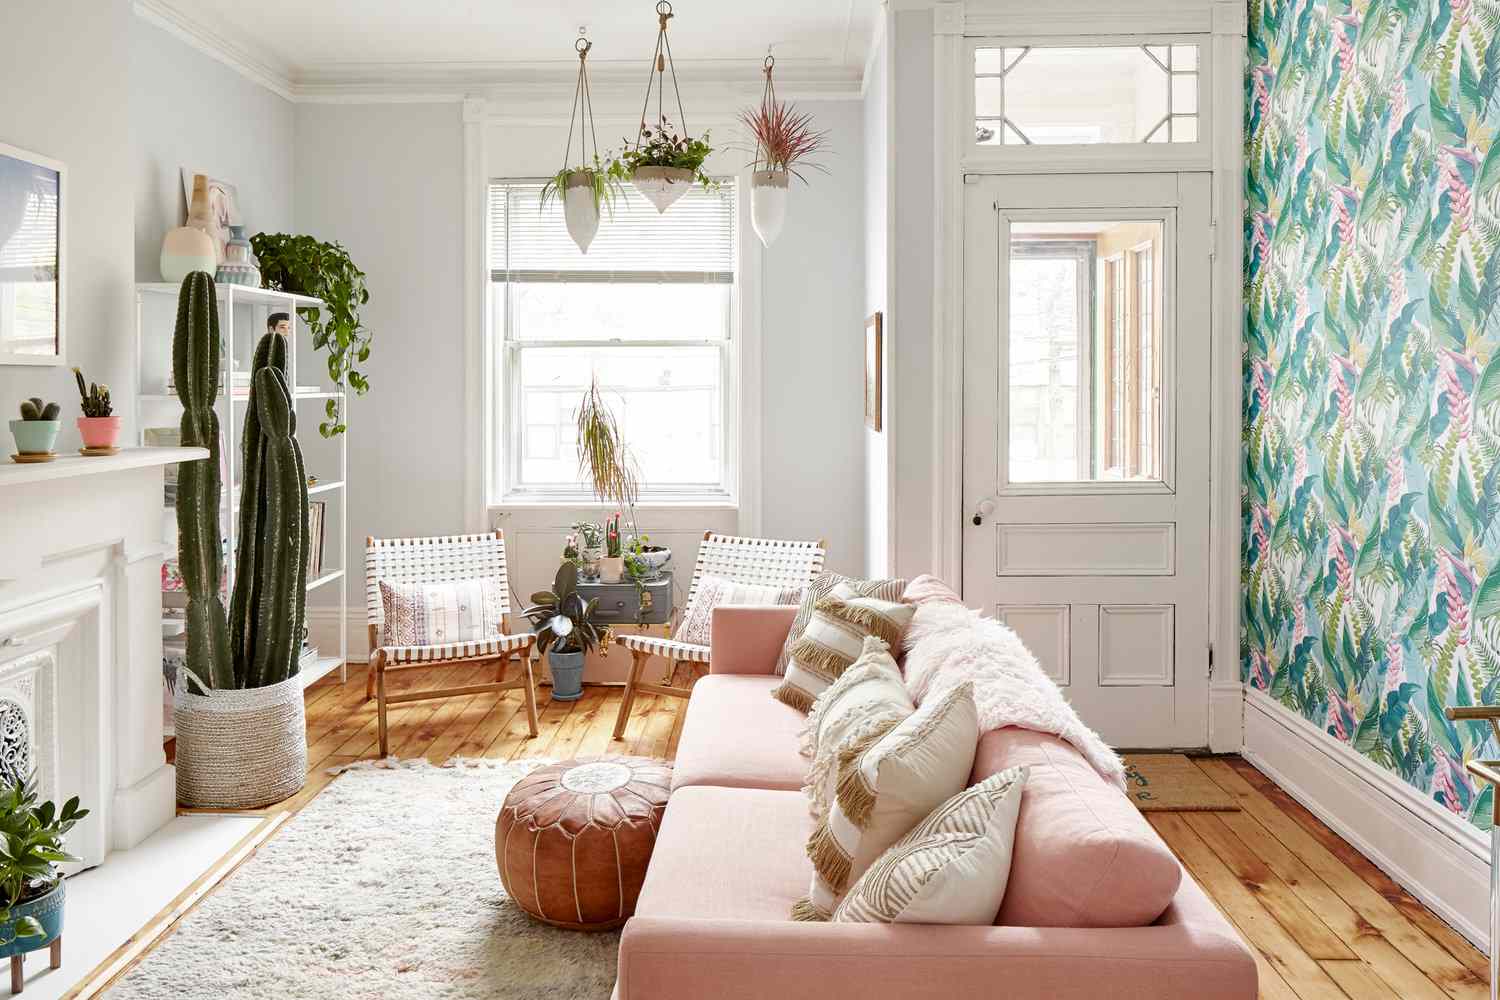 Enhancing Elegance: Home Improvement For A Pretty Pretty Space